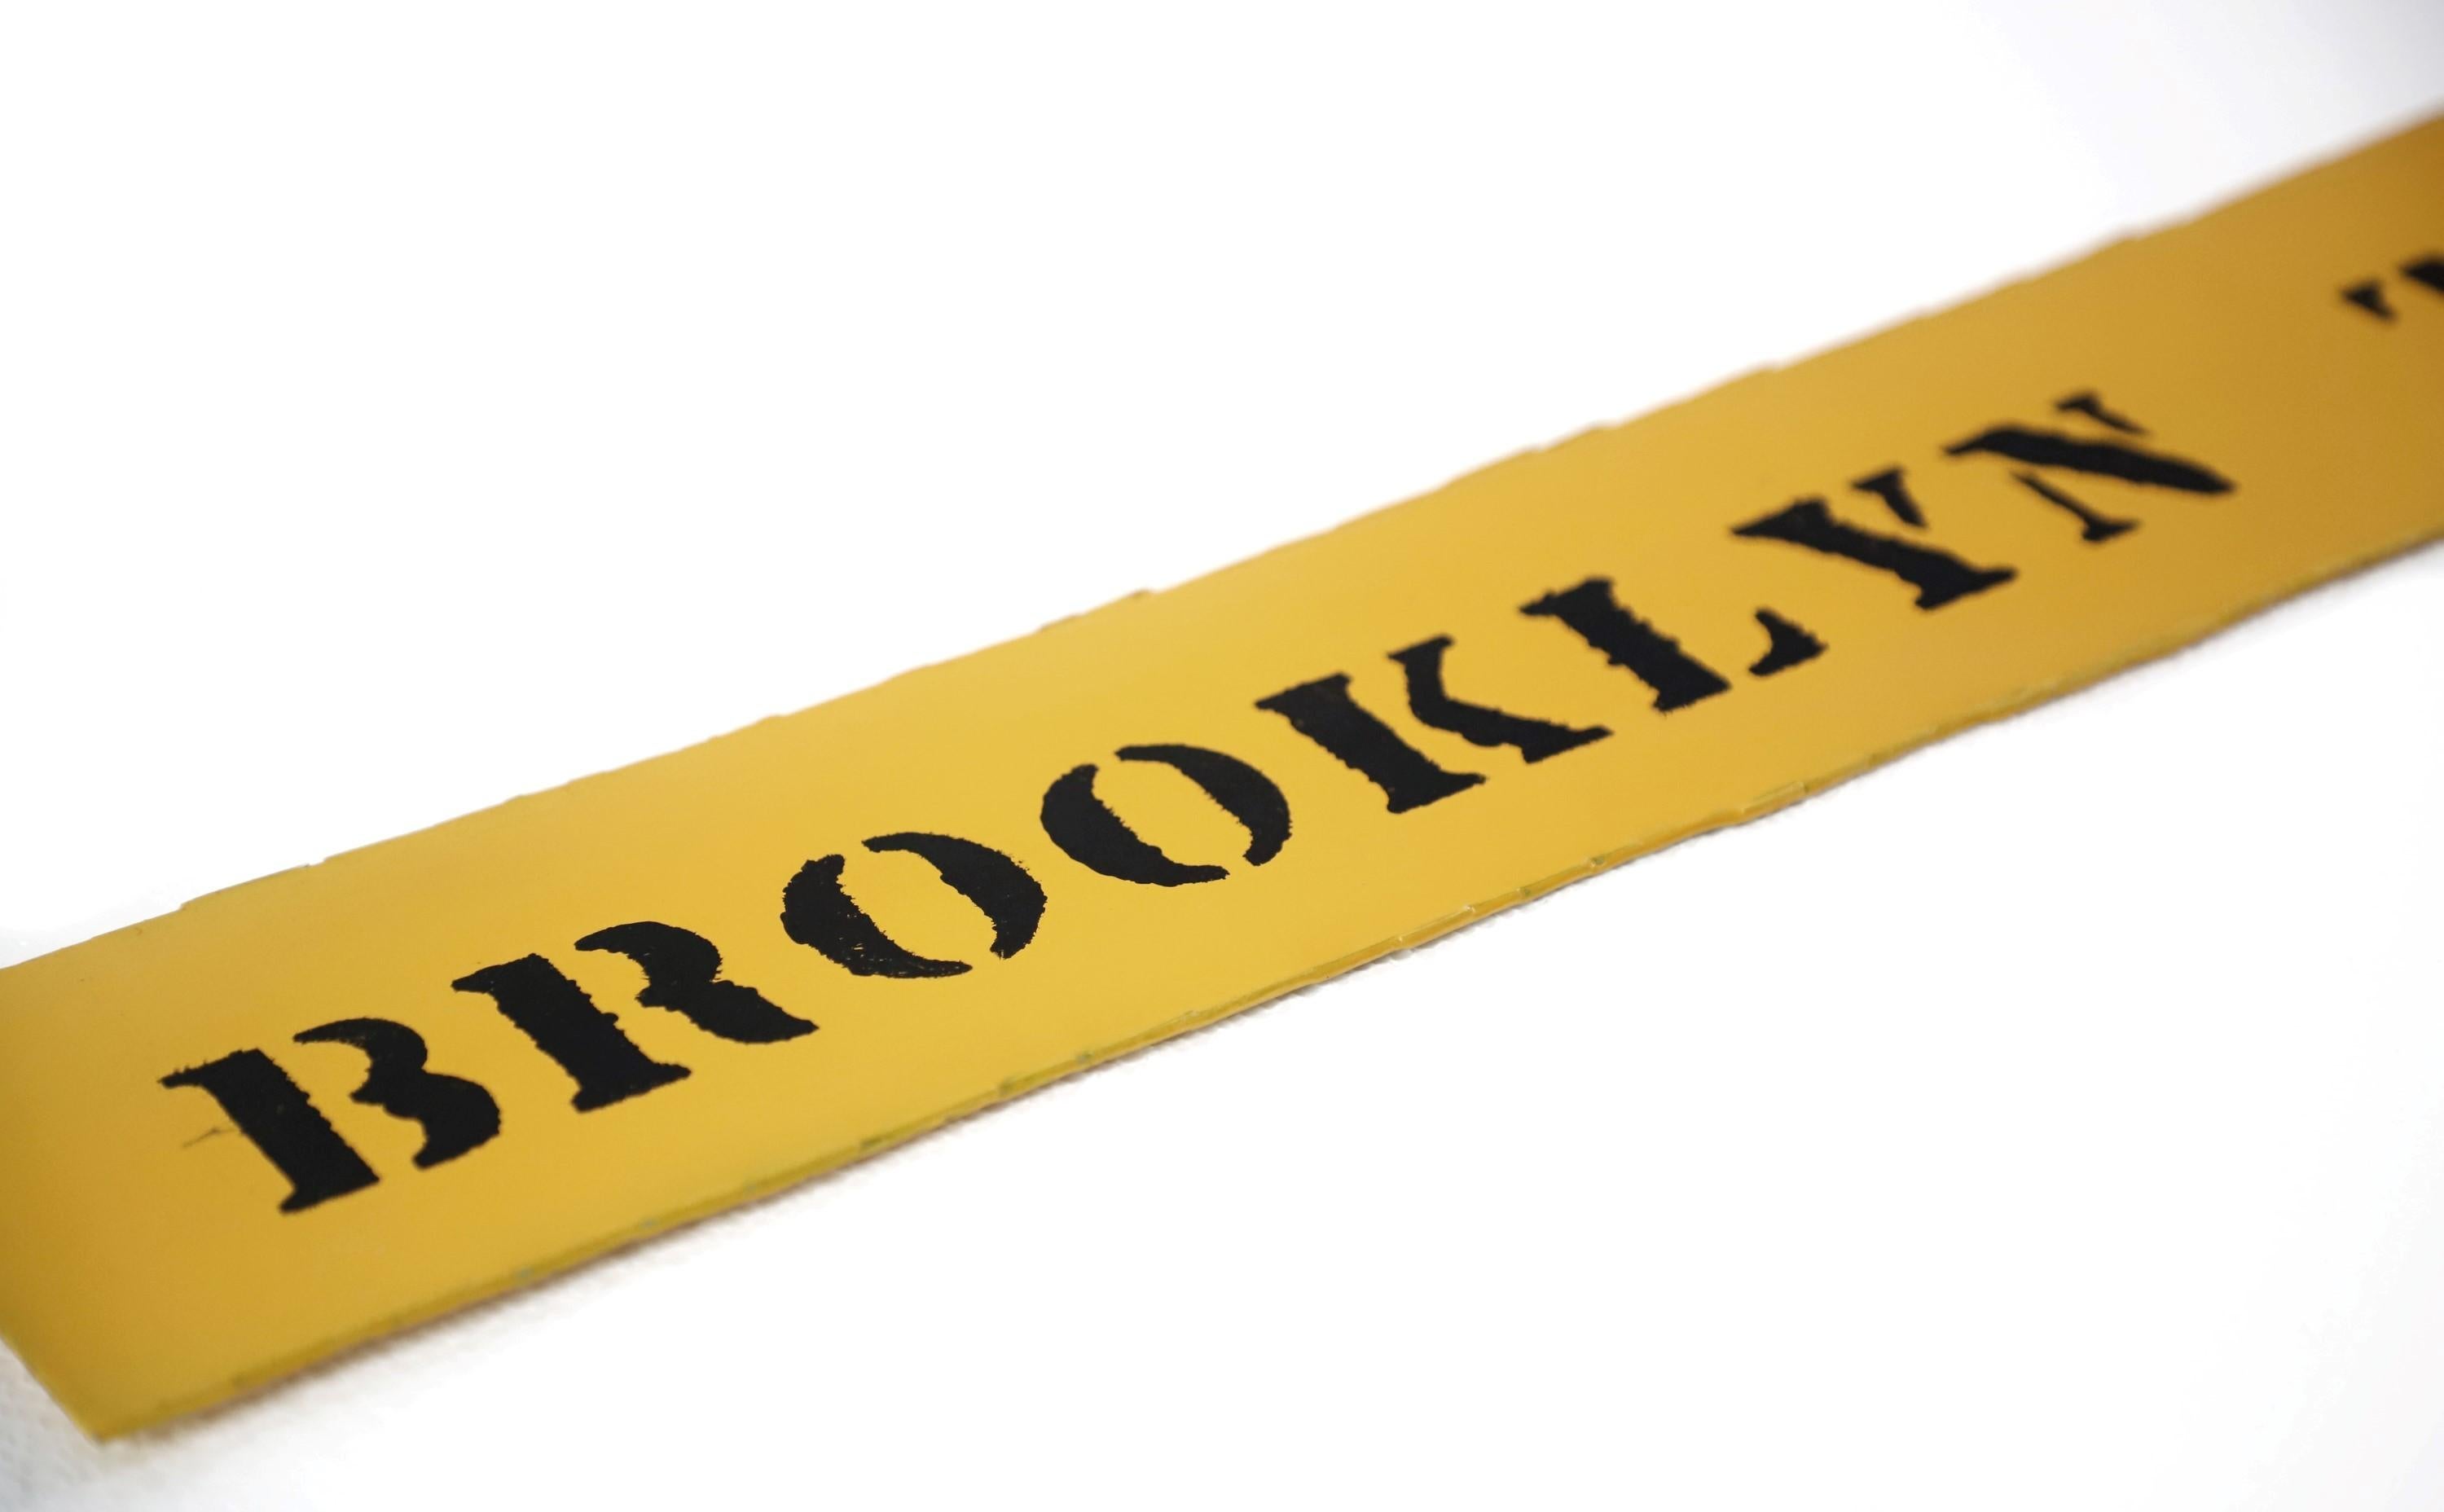 Reclaimed Industrial enameled yellow steel sign with Brooklyn TWP. from Brooklyn, PA. in black lettering. Small quantity available at time of posting. Please inquire. Priced each. Please note, this item is located in our Scranton, PA location. 